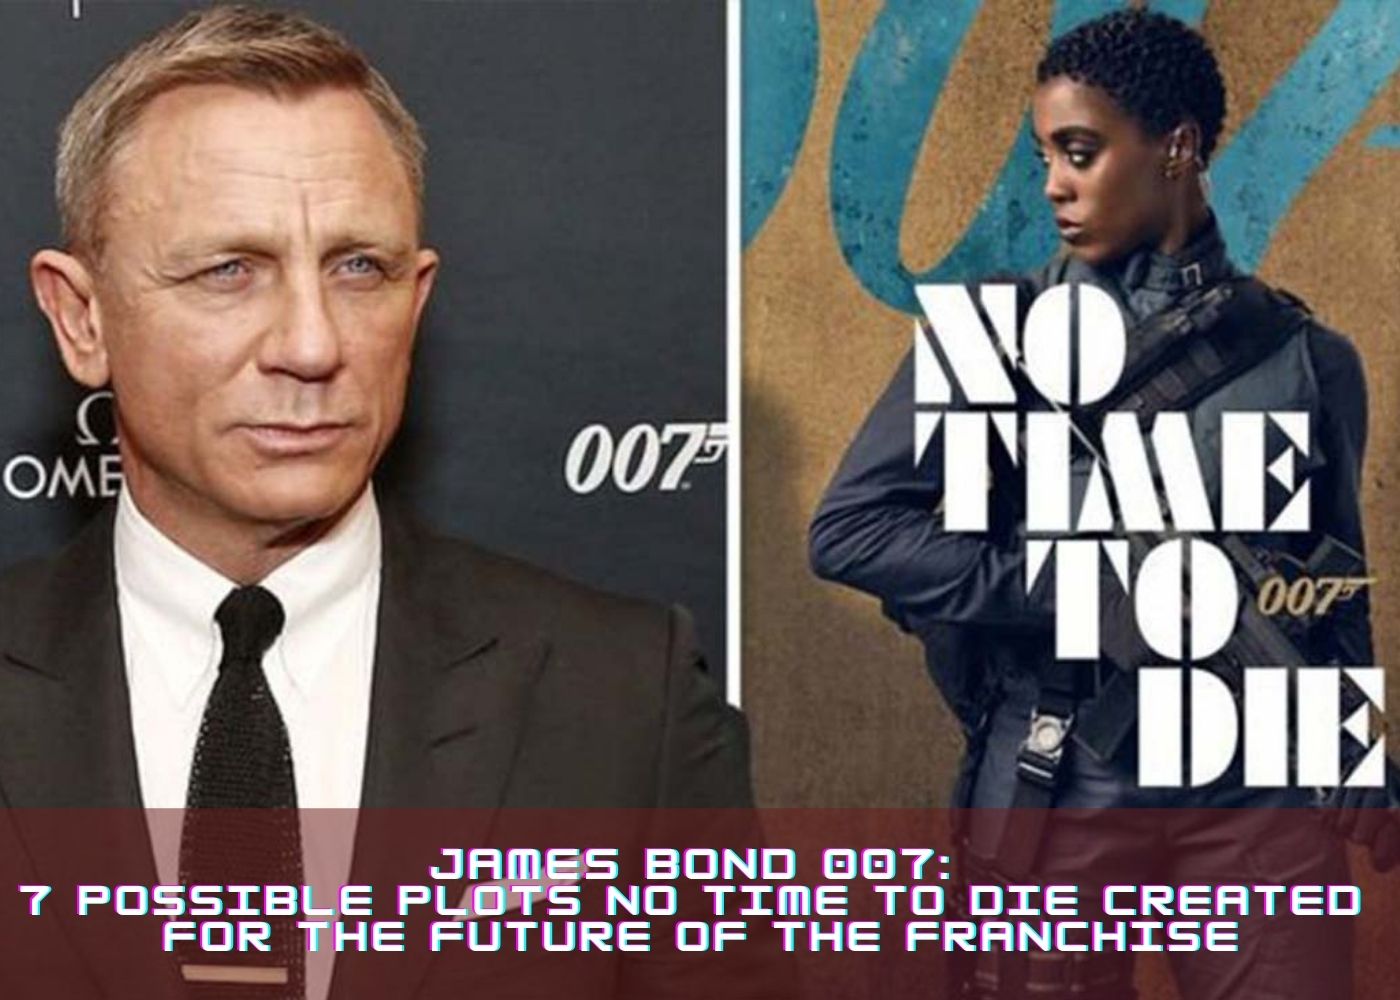 James Bond 007:  7 Possible Plots No Time to Die Created  for the future of the Franchise